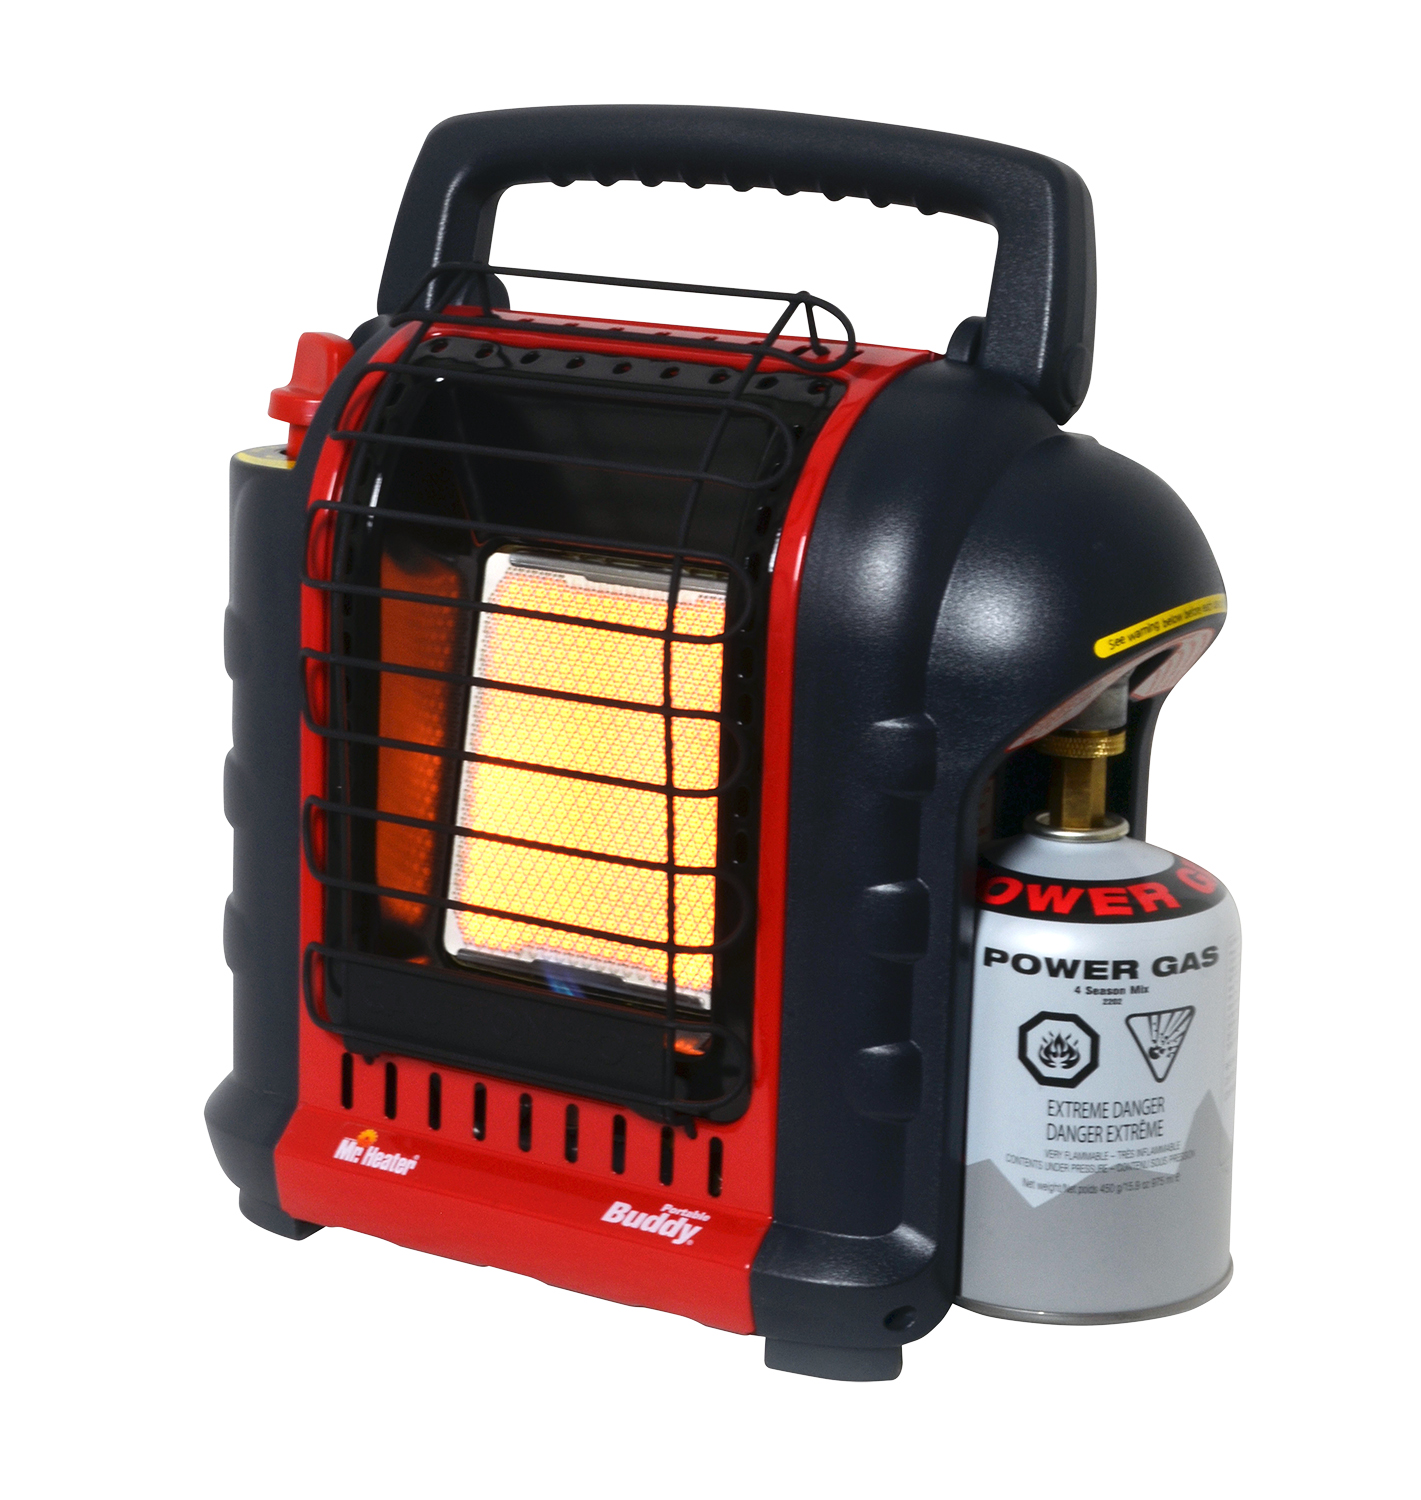 blog-mr-heater-buddy-heater-launched-in-europe